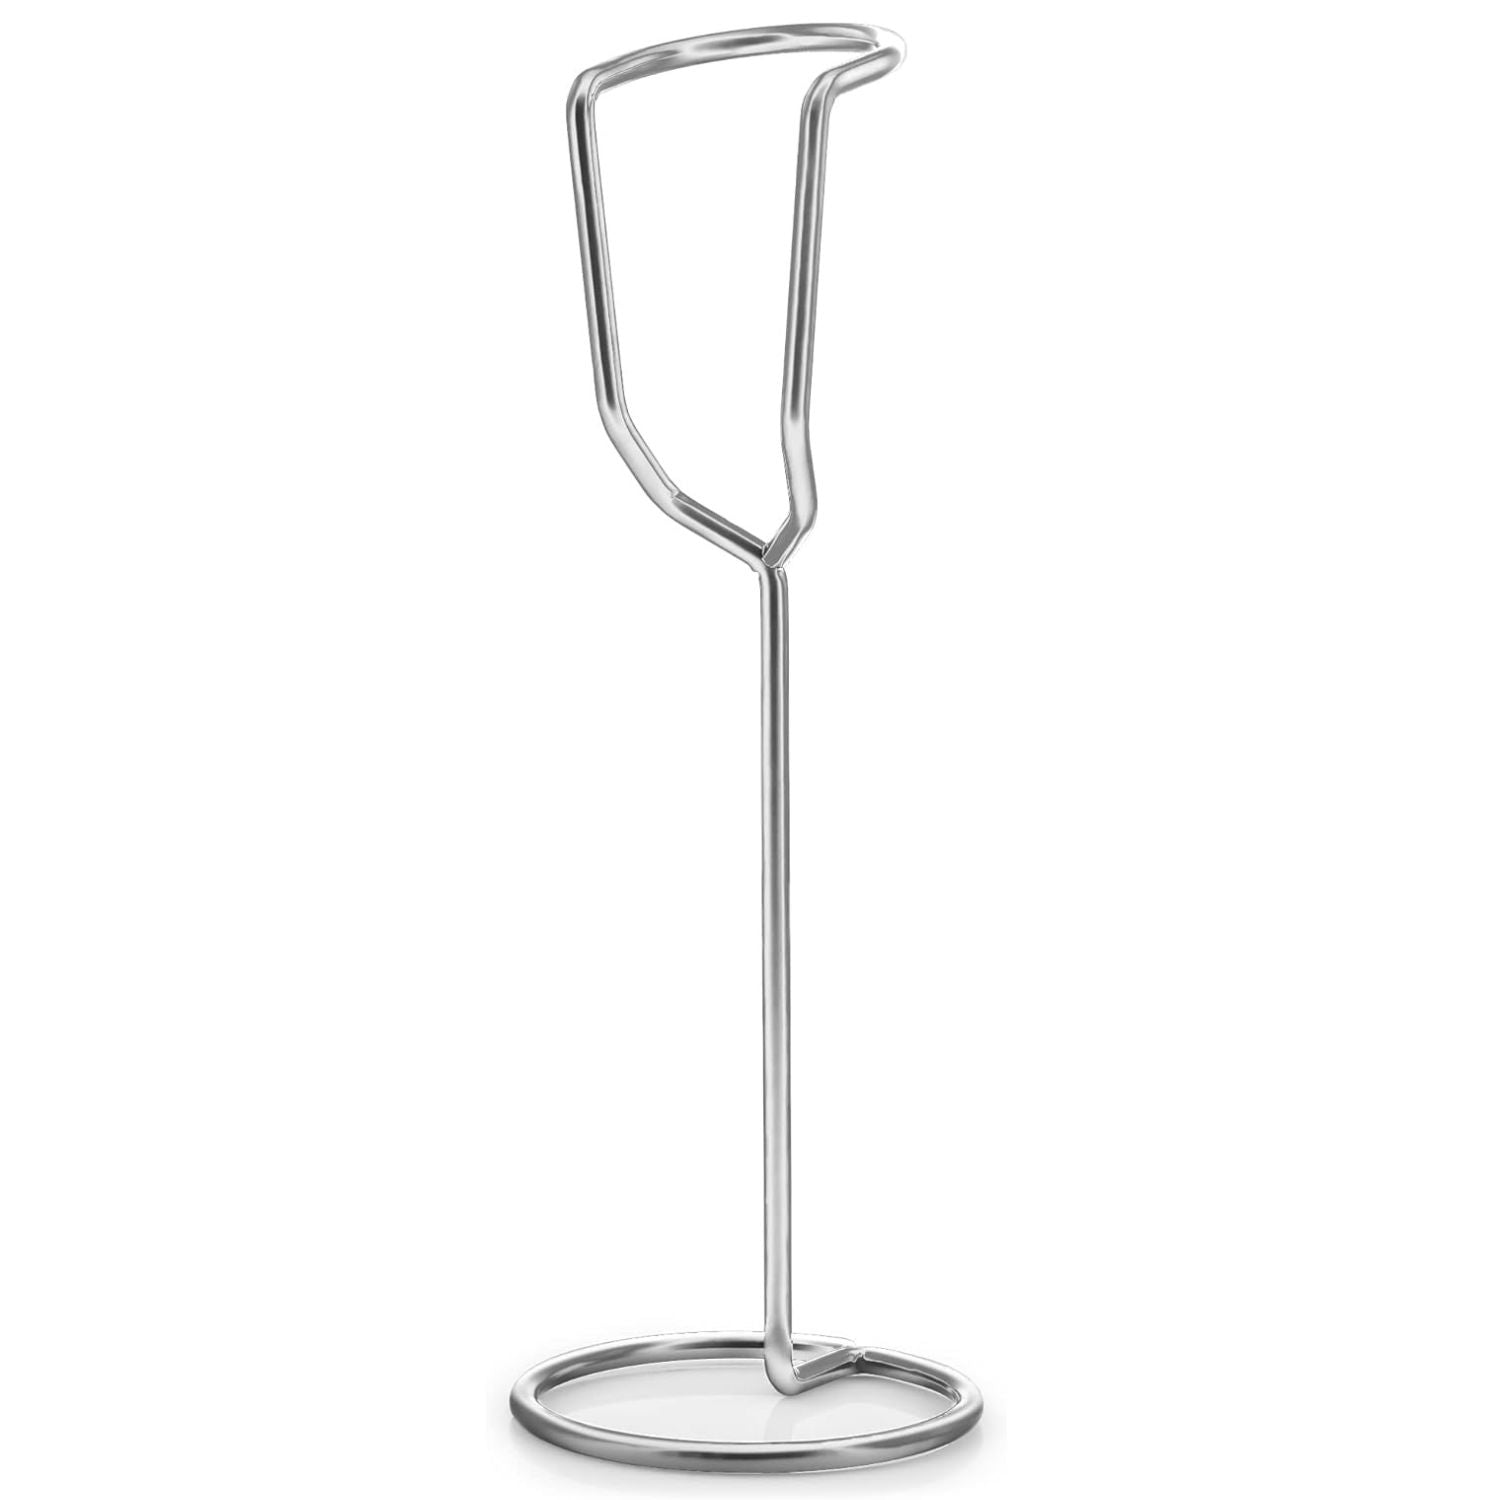 Zulay Milk Handheld Frother With Upgraded Holster Stand